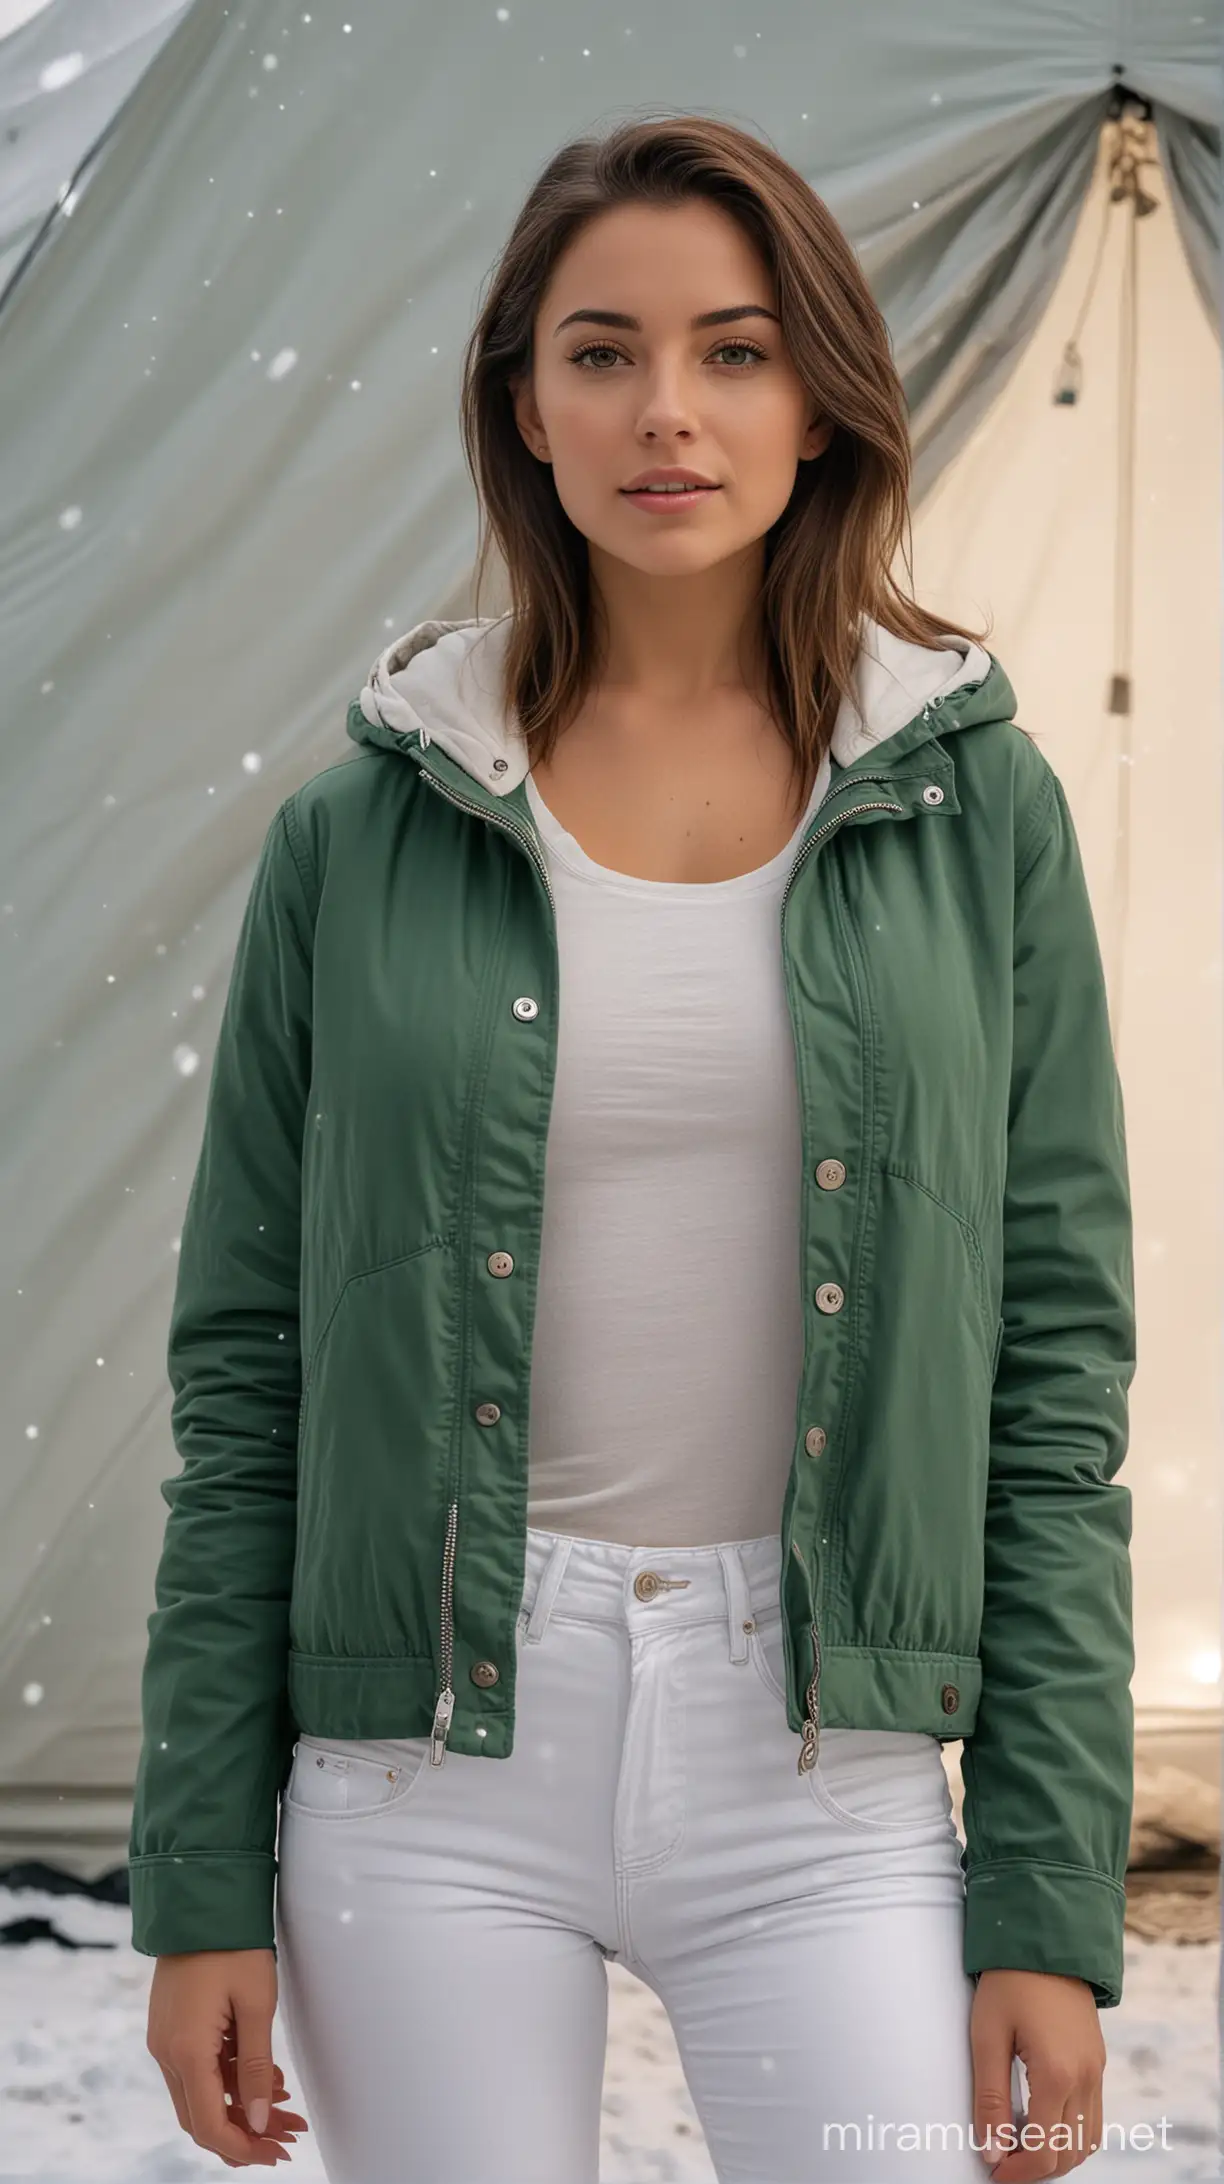 4k Ai art front view beautiful USA girl ear tops white jeans and green jacket in USA snow tent 